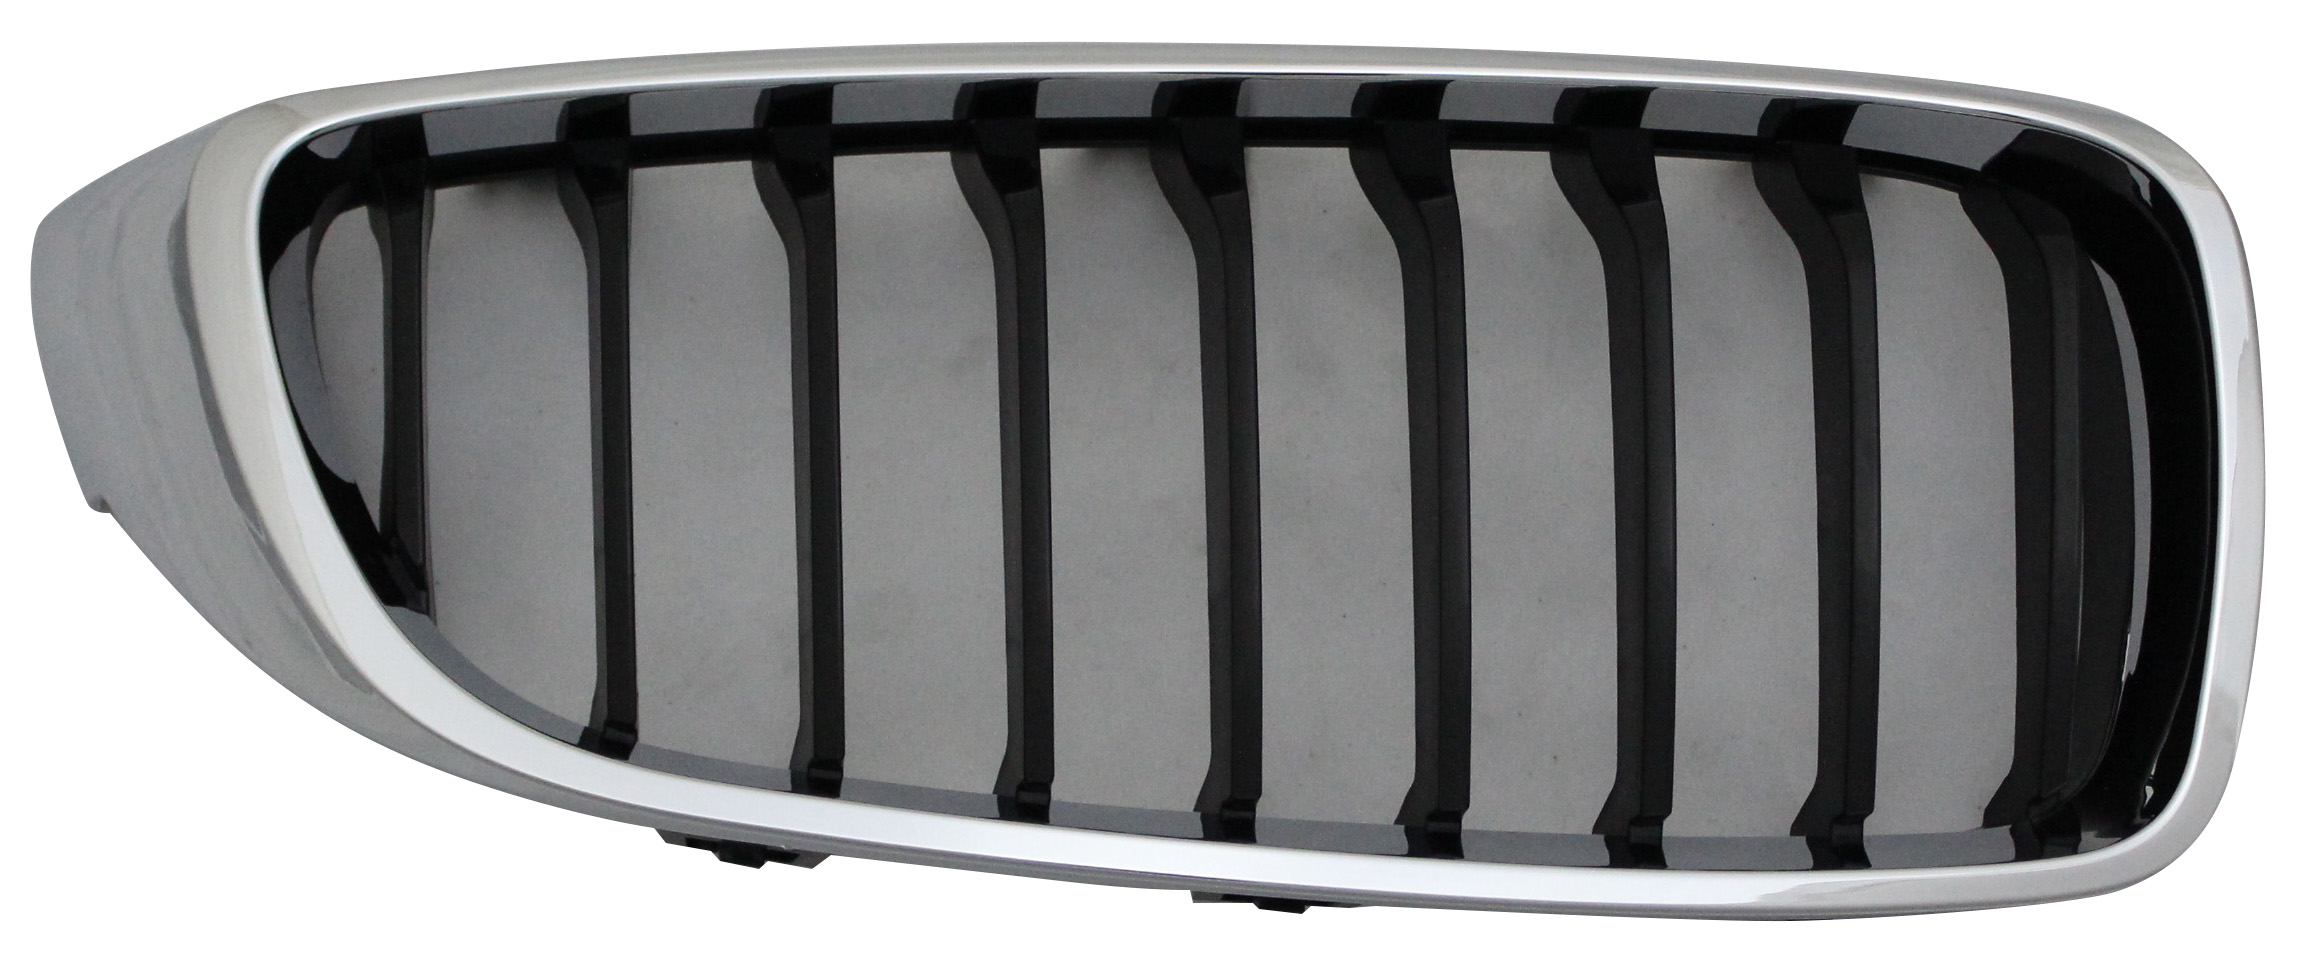 Aftermarket GRILLES for BMW - 428I GRAN COUPE, 428i Gran Coupe,15-16,Grille assy